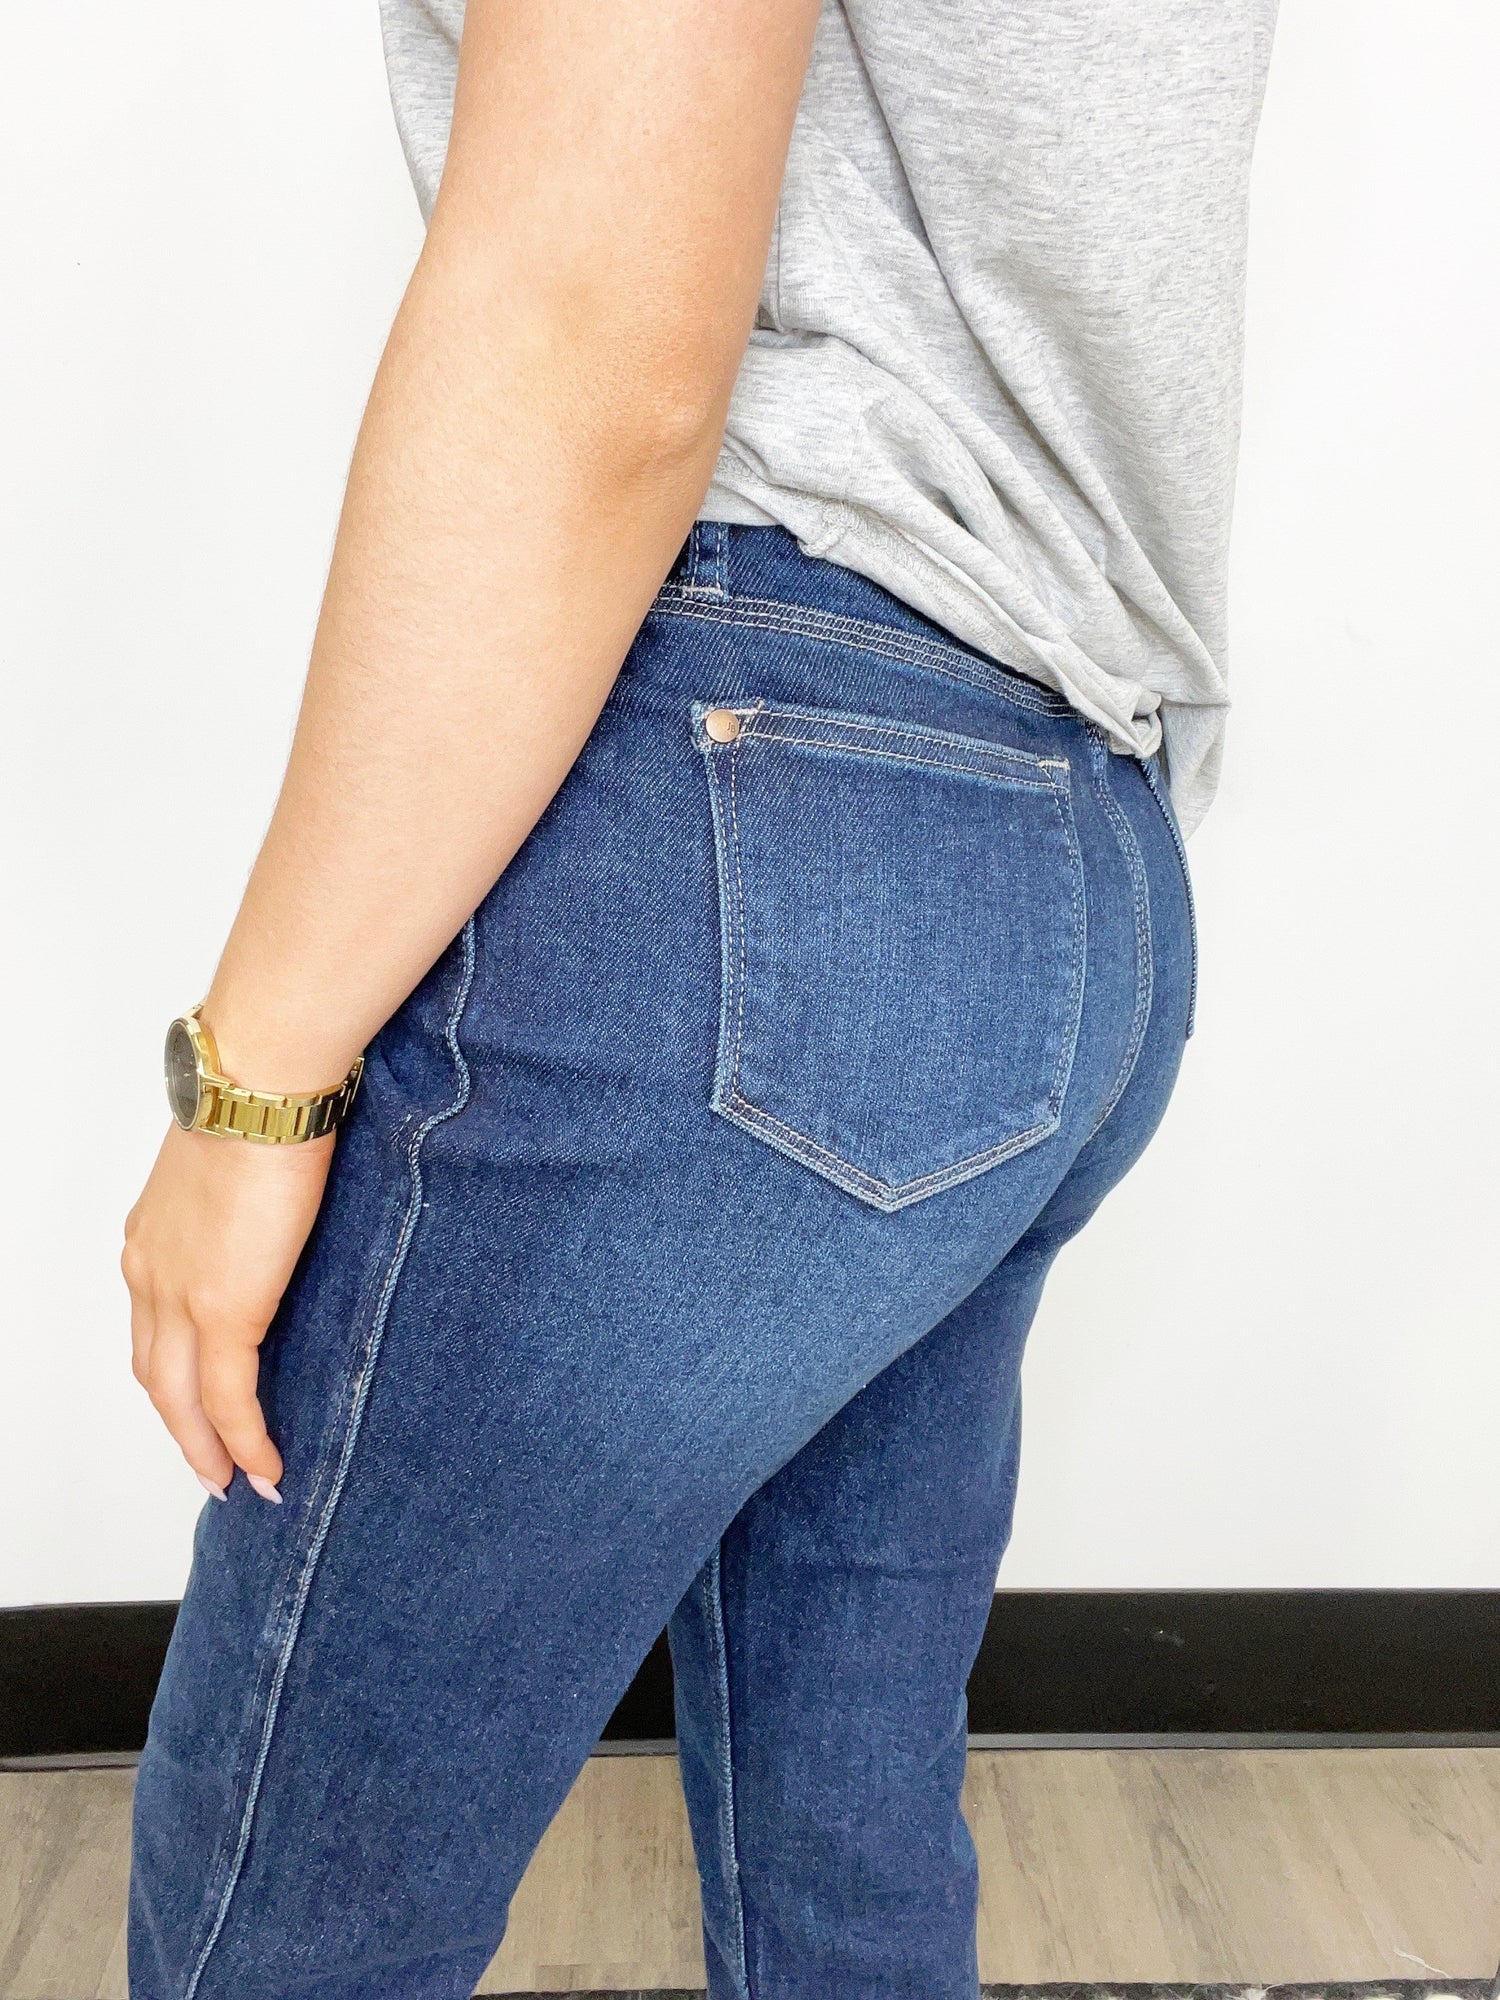 Judy Blue Leave Her Wild High-Rise Cropped Denim